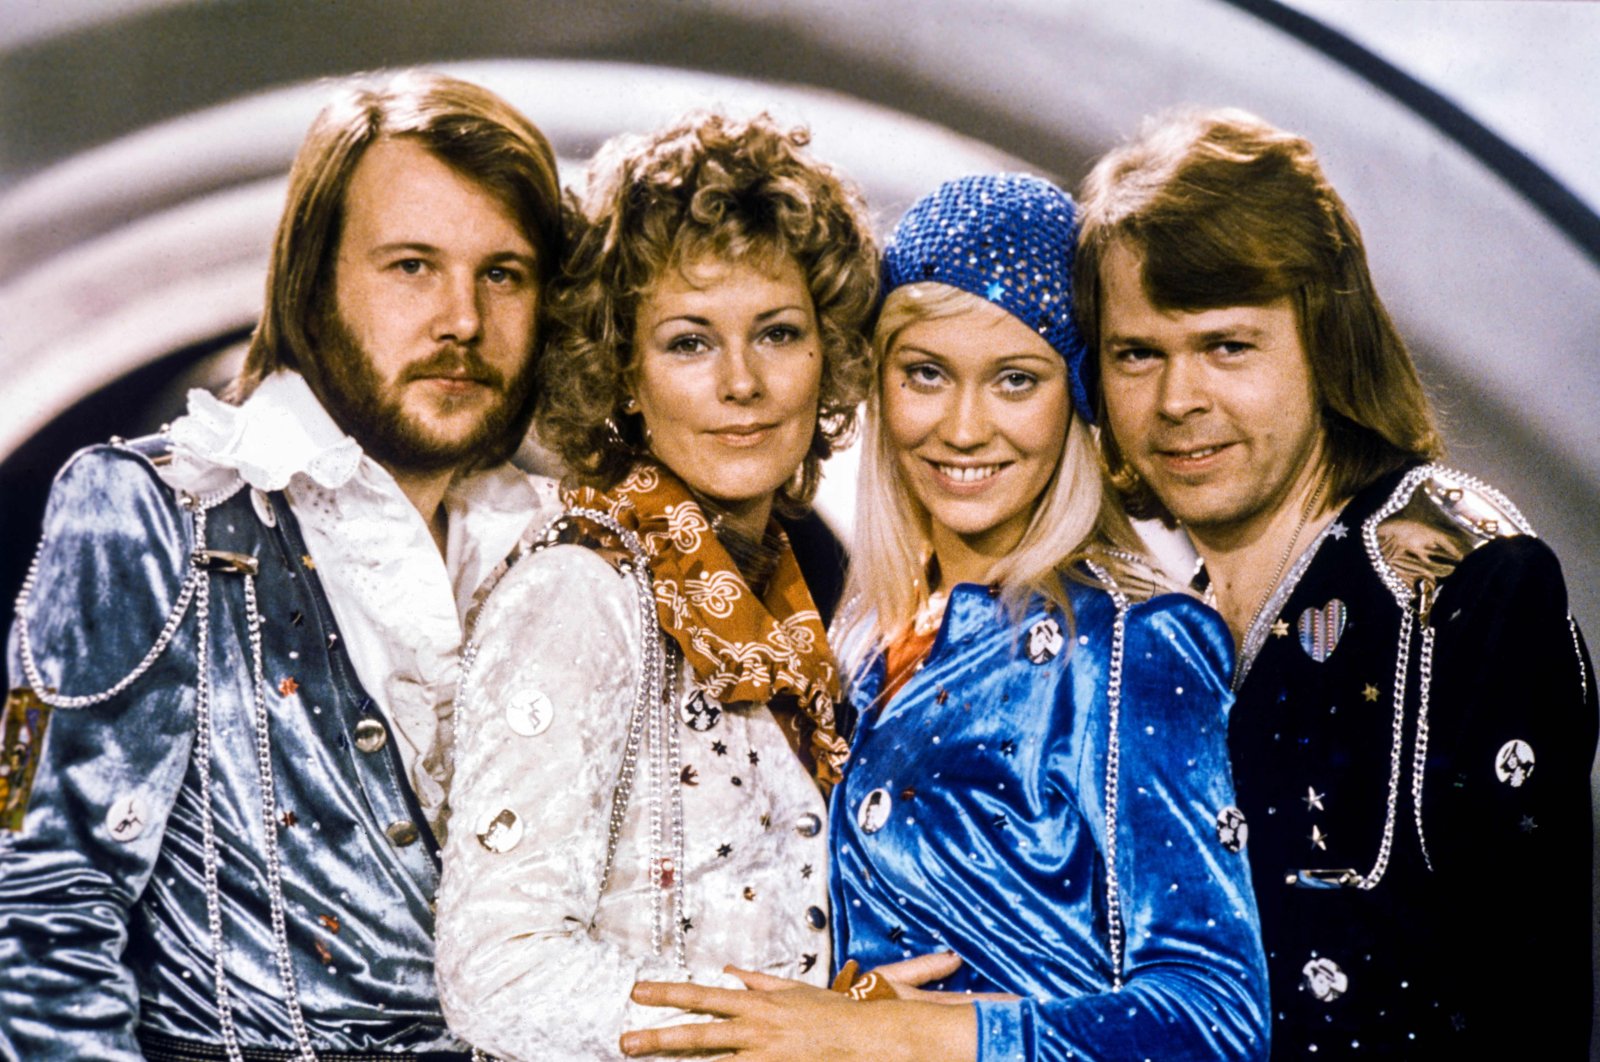 Abba with its members (L-R) Benny Andersson, Anni-Frid Lyngstad, Agnetha Faltskog and Bjorn Ulvaeus posing after winning the Swedish branch of the Eurovision Song Contest with their song &quot;Waterloo,&quot; Stockholm, Sweden, Feb. 9, 1974. (AFP File Photo)